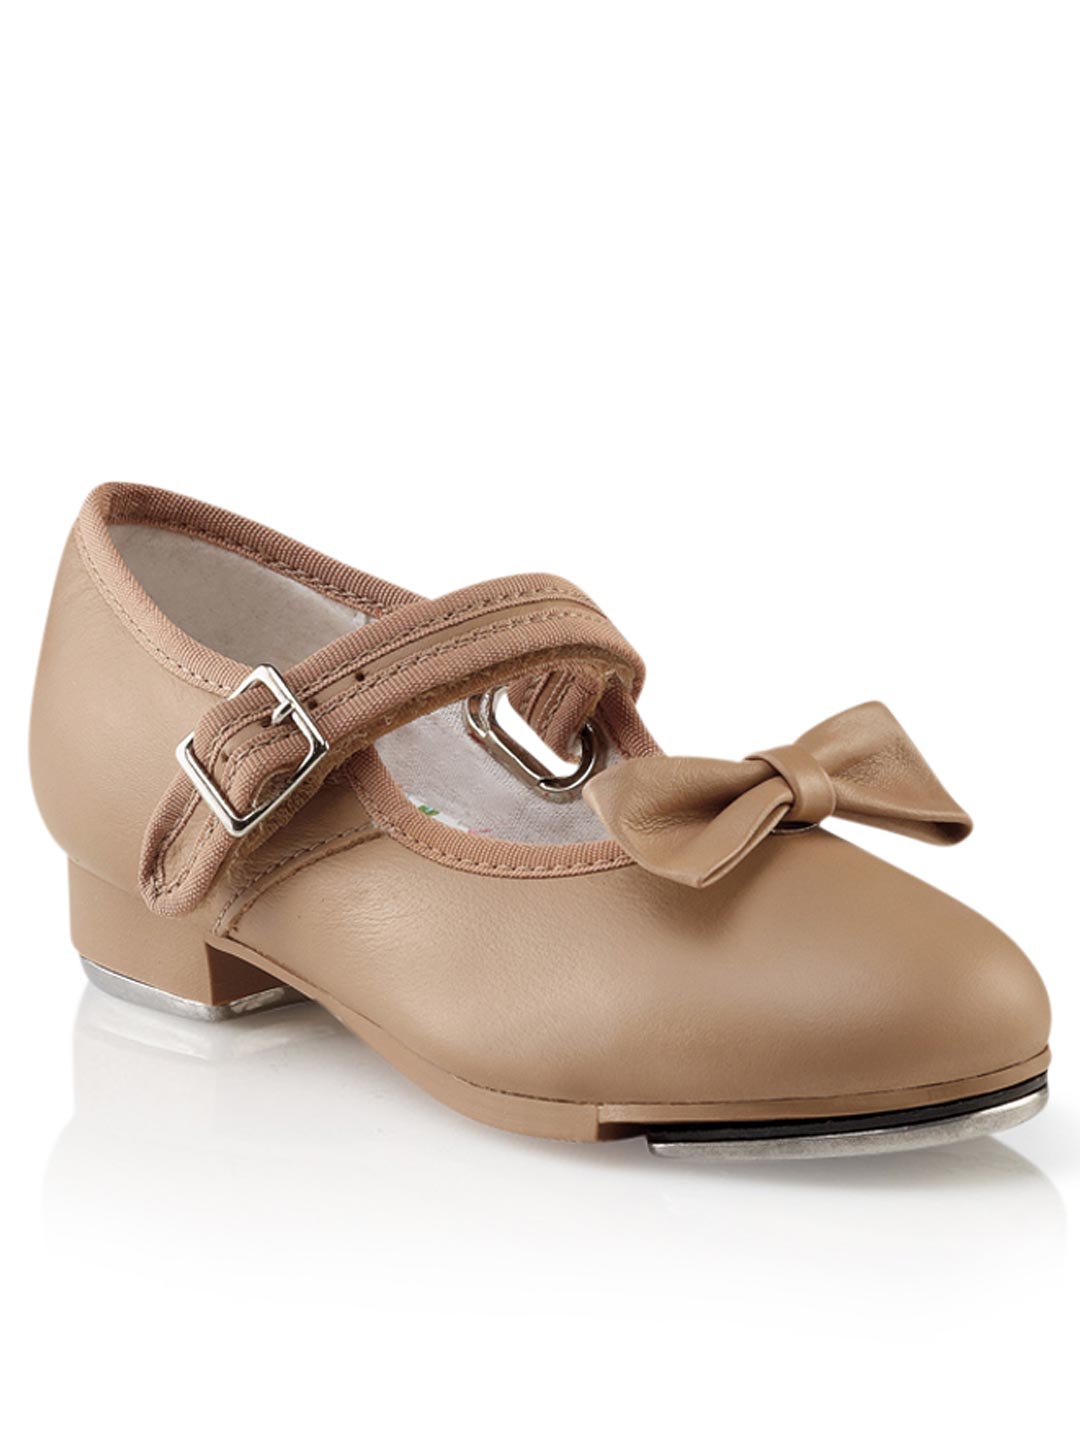 Kids Mary Janes Tap Shoes